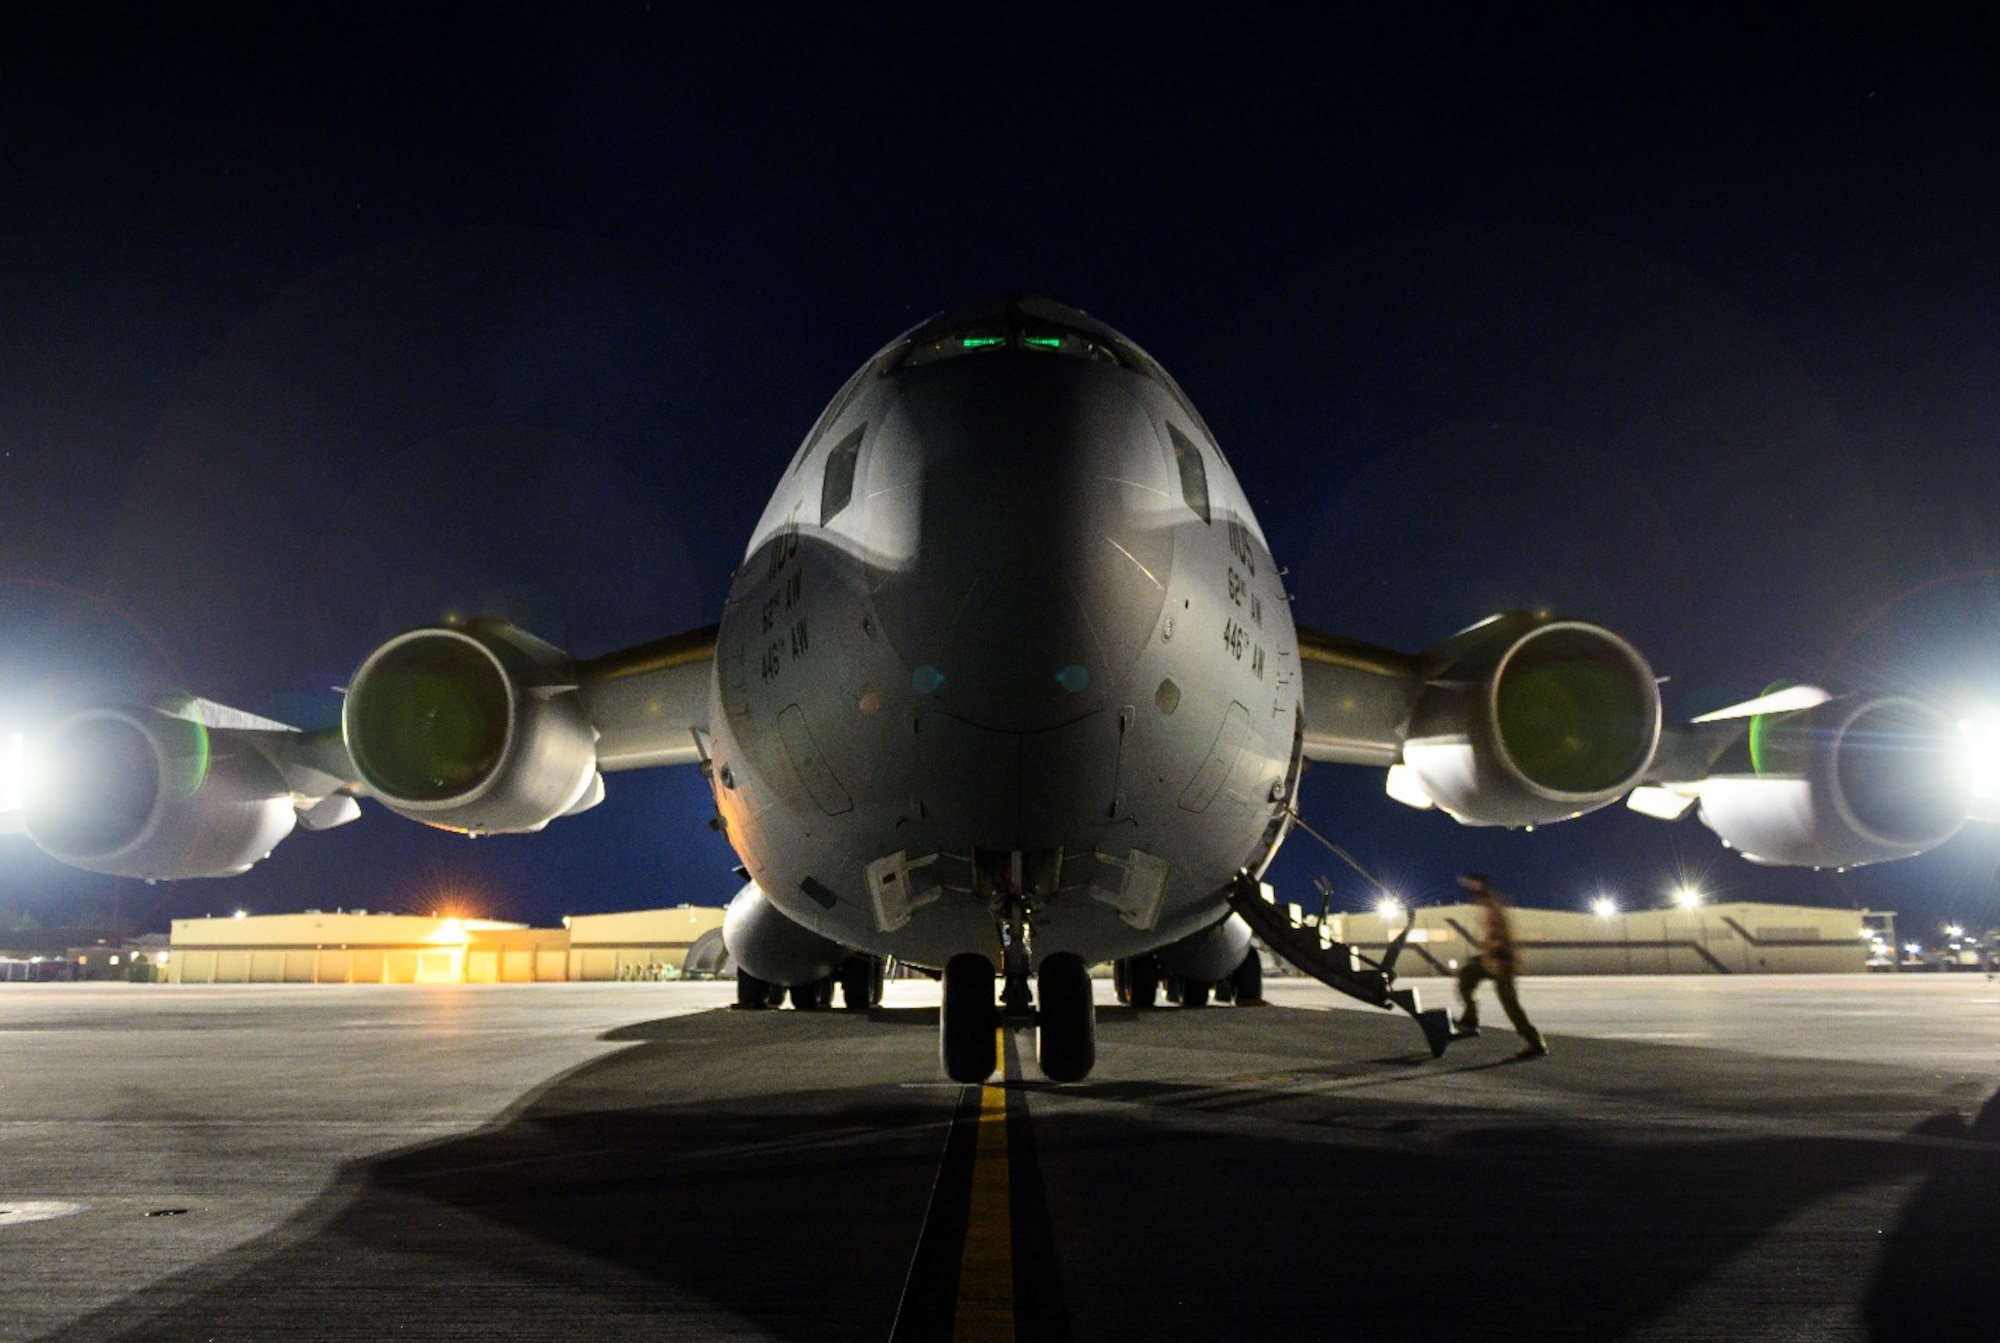 An Airman boards a C-17 Globemaster III from Joint Base Lewis-McChord, Washington, on the flight line at Mountain Home Air Force Base, Idaho, April 27, 2021. The C-17 played a prominent role in exercise Rainier War by ensuring prompt distribution of both defensive and offensive capabilities to simulated areas during the training.